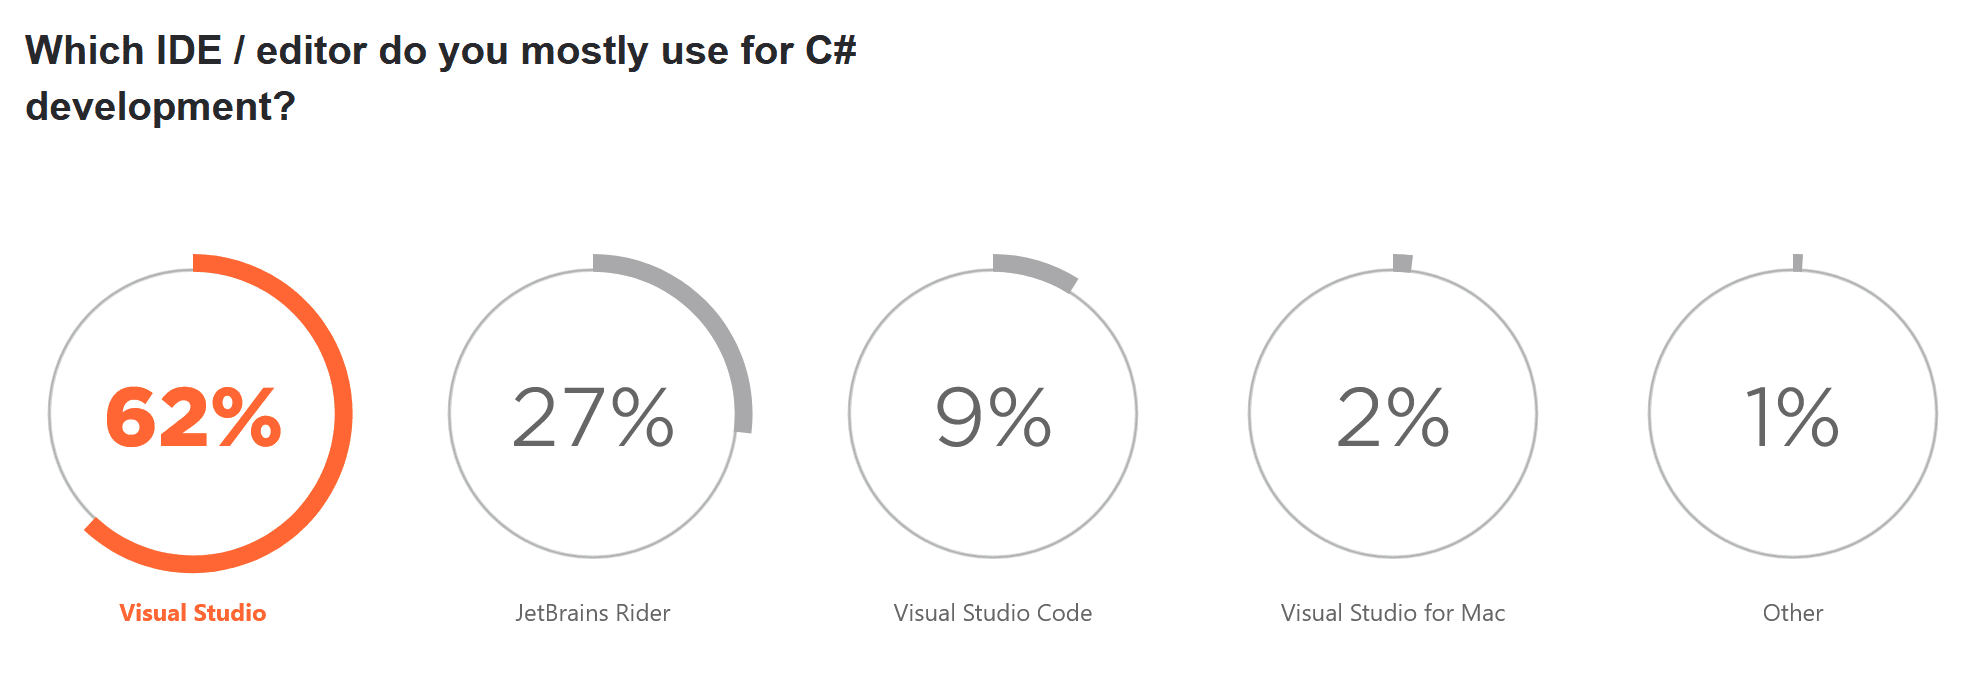 Visual Studio is the most popular IDE but Rider is one of the most loved